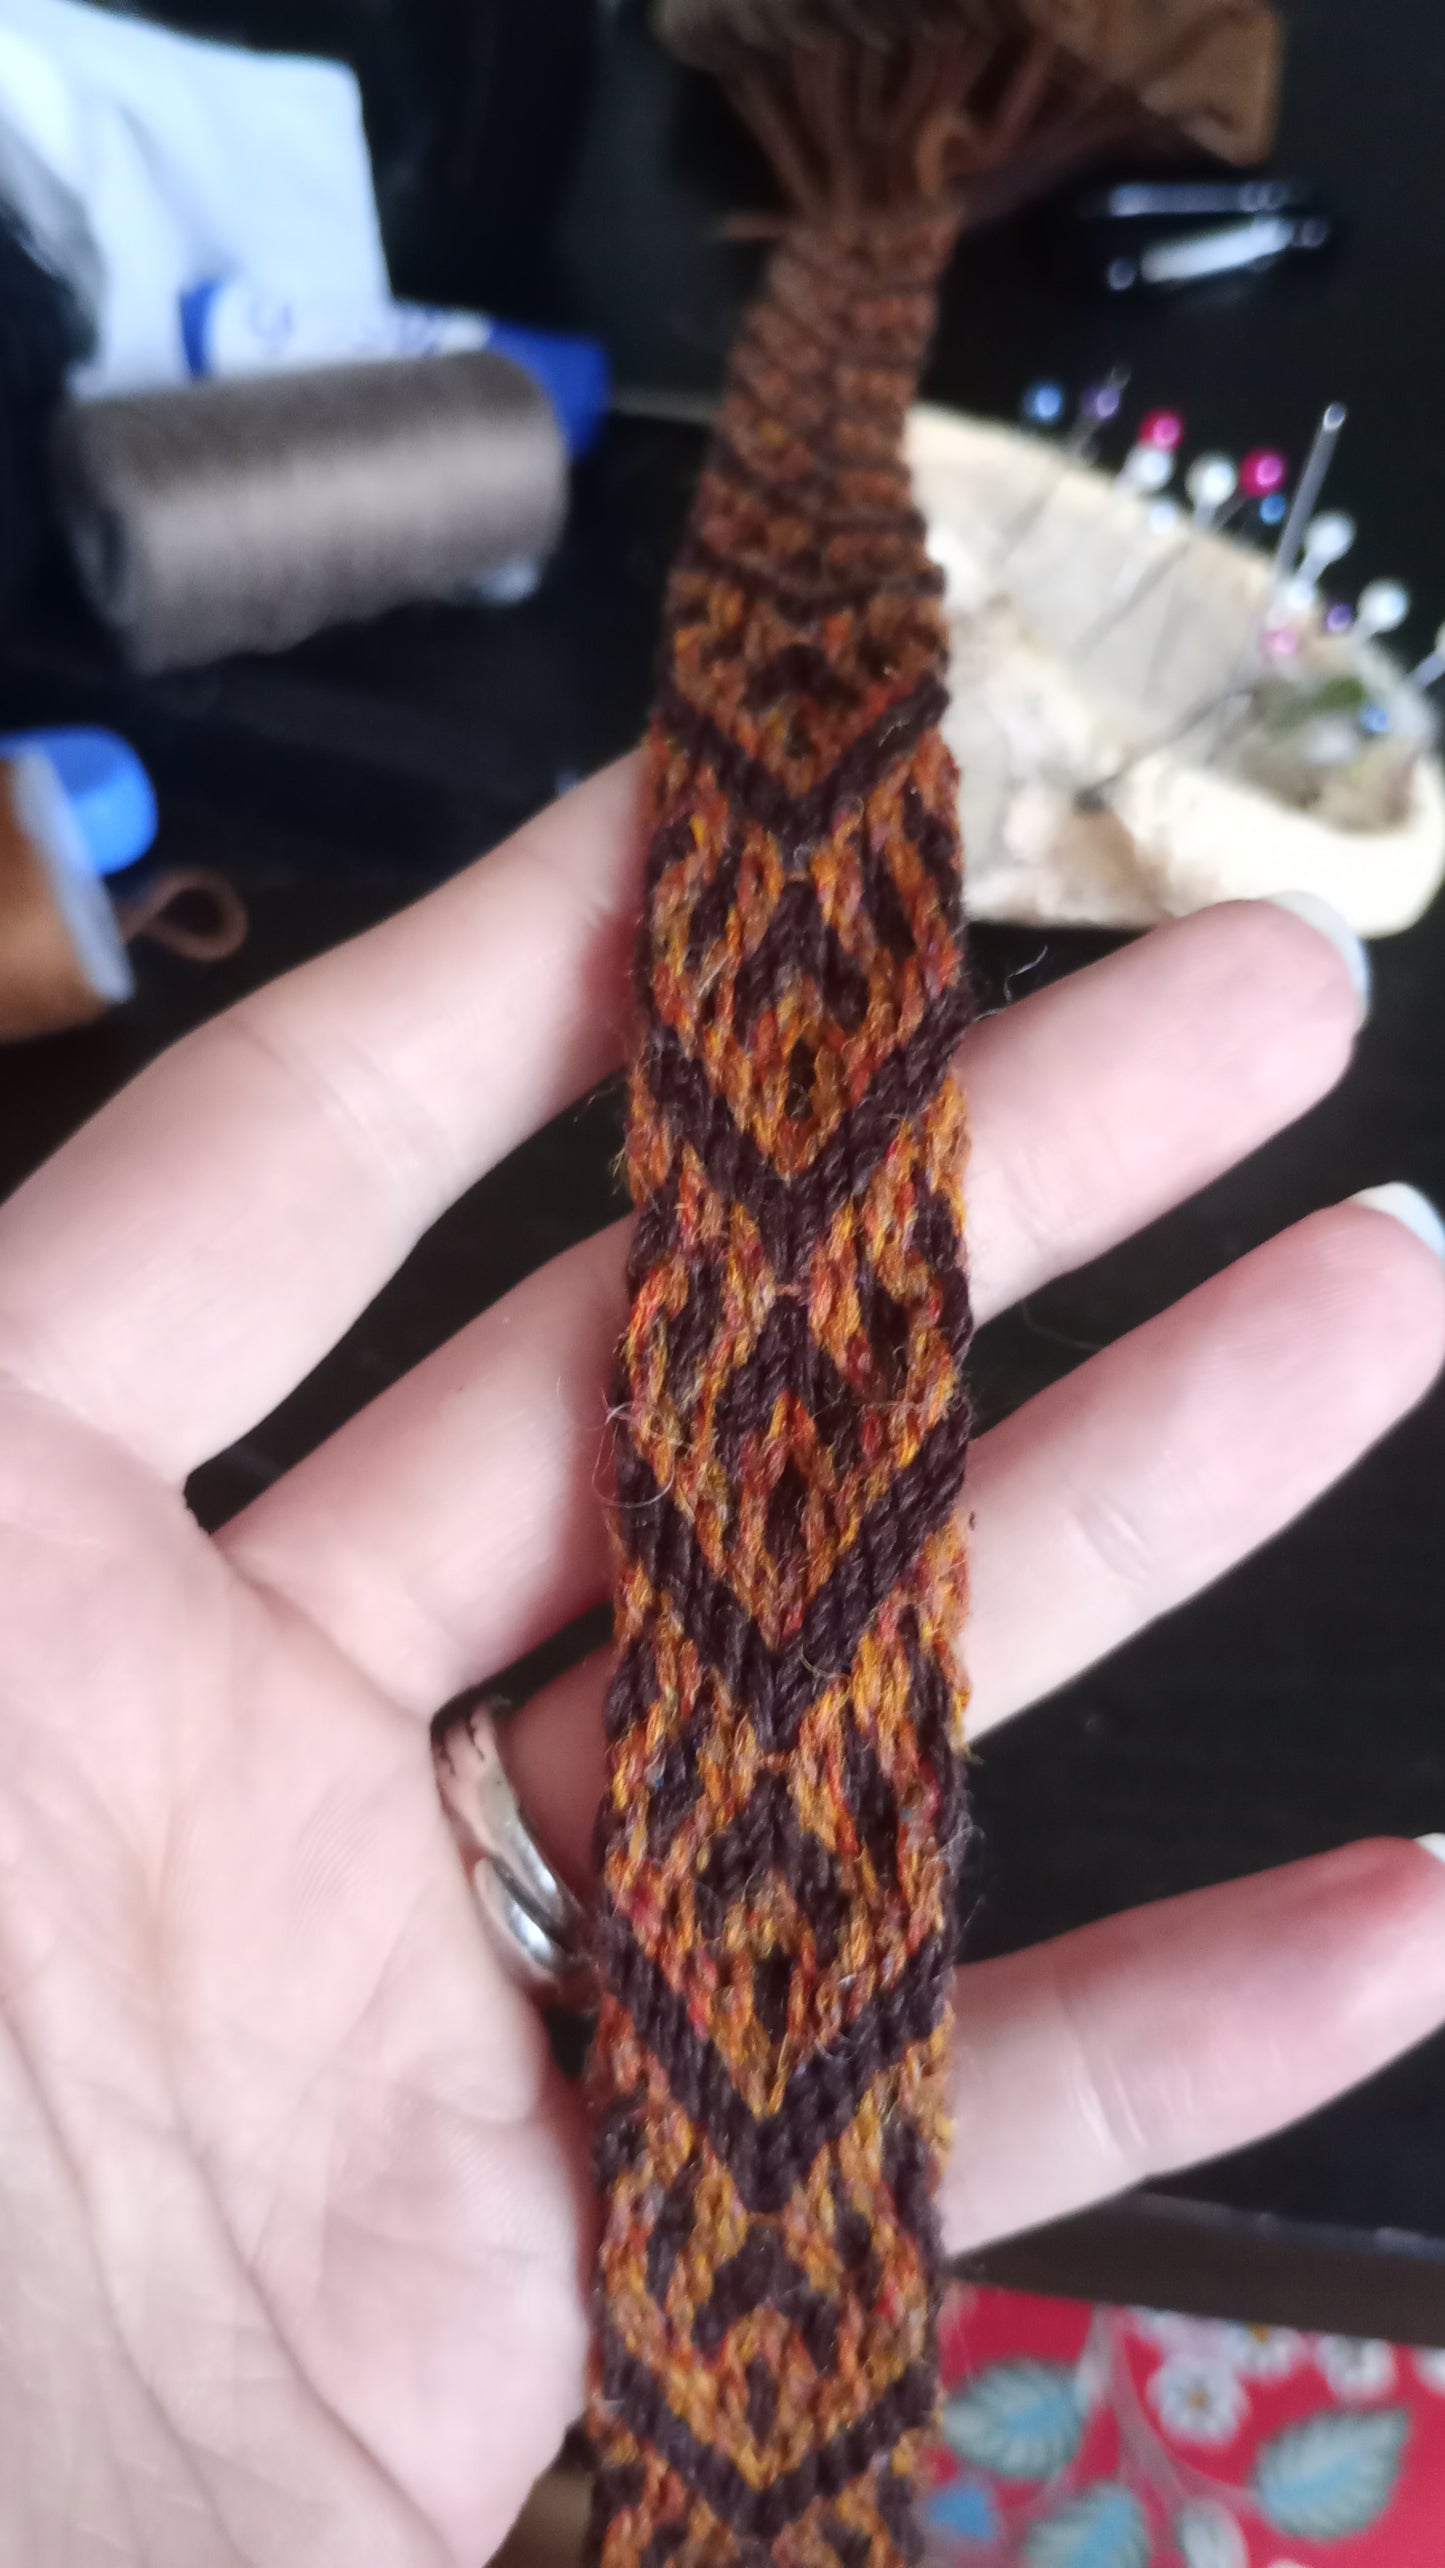 Brown belt with spike and arrow pattern